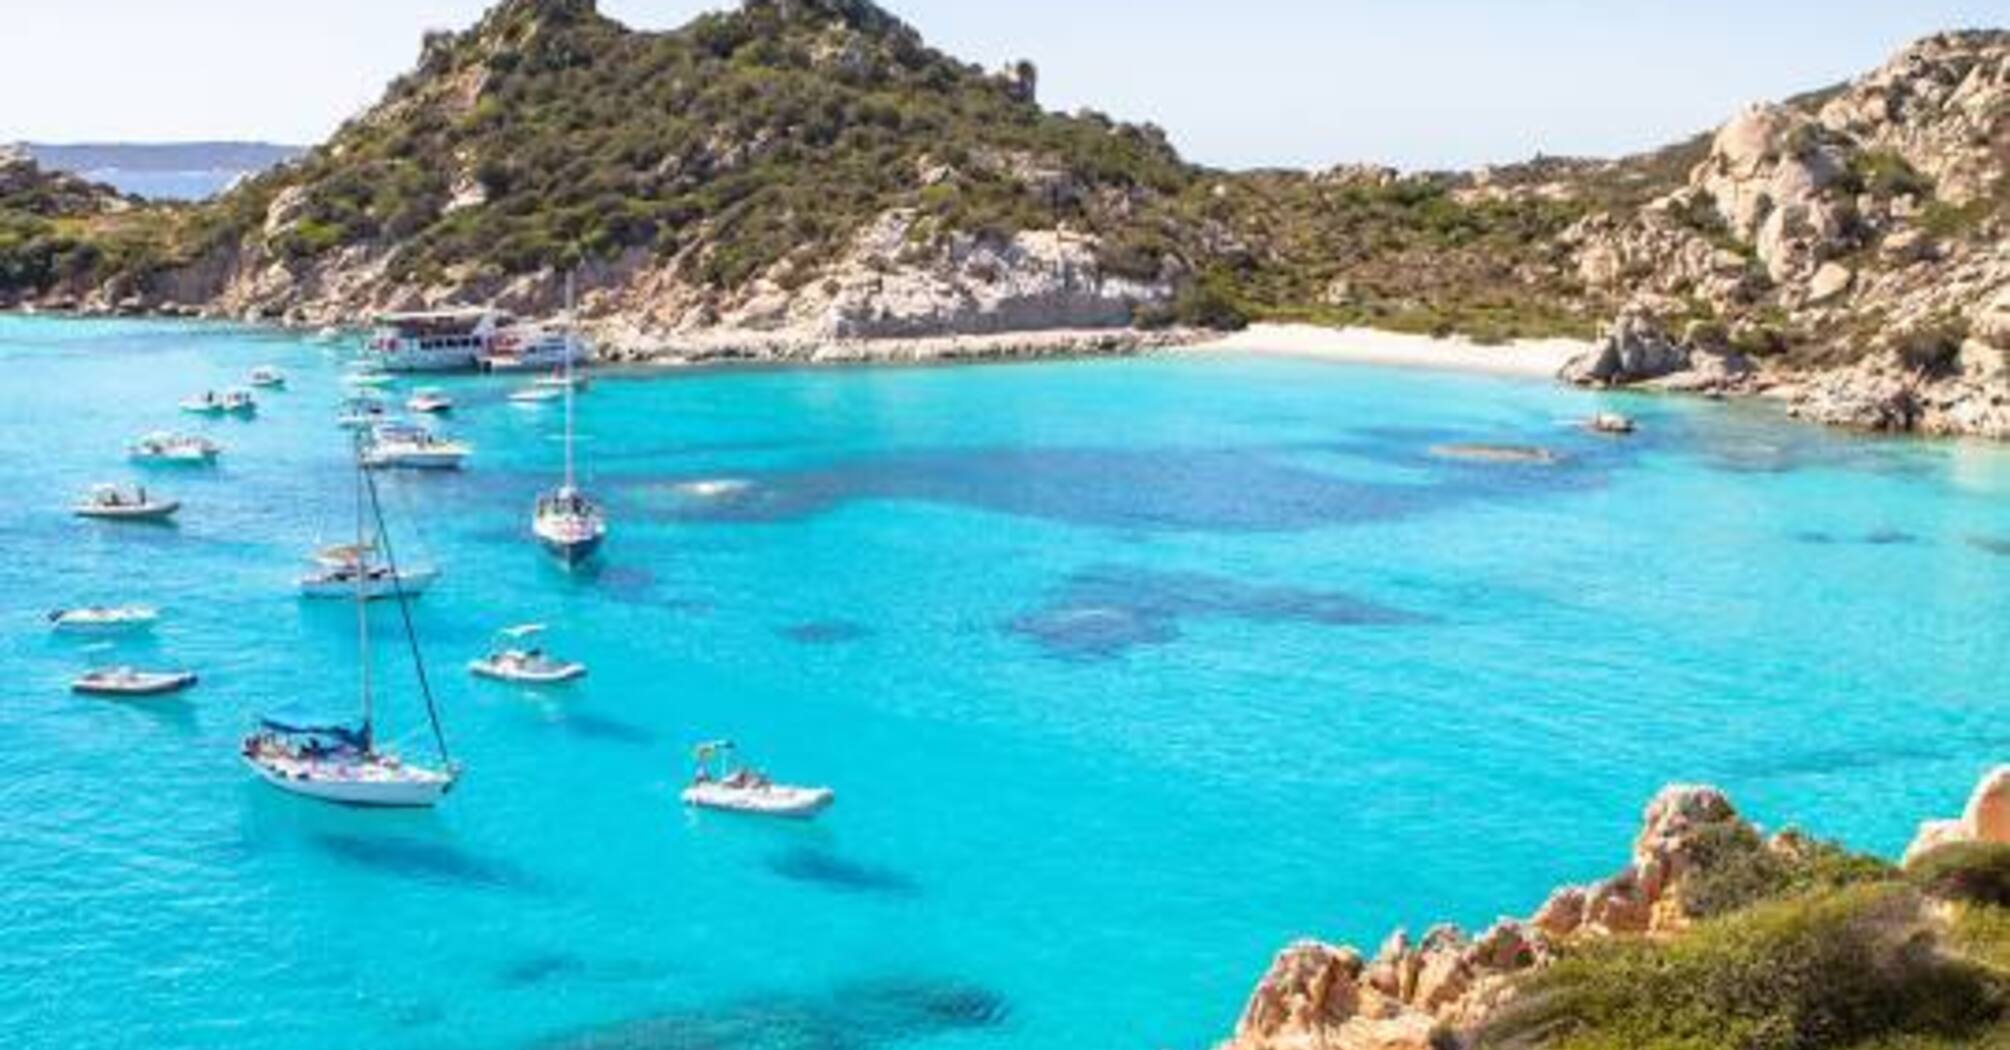 Things to do on vacation in Sardinia